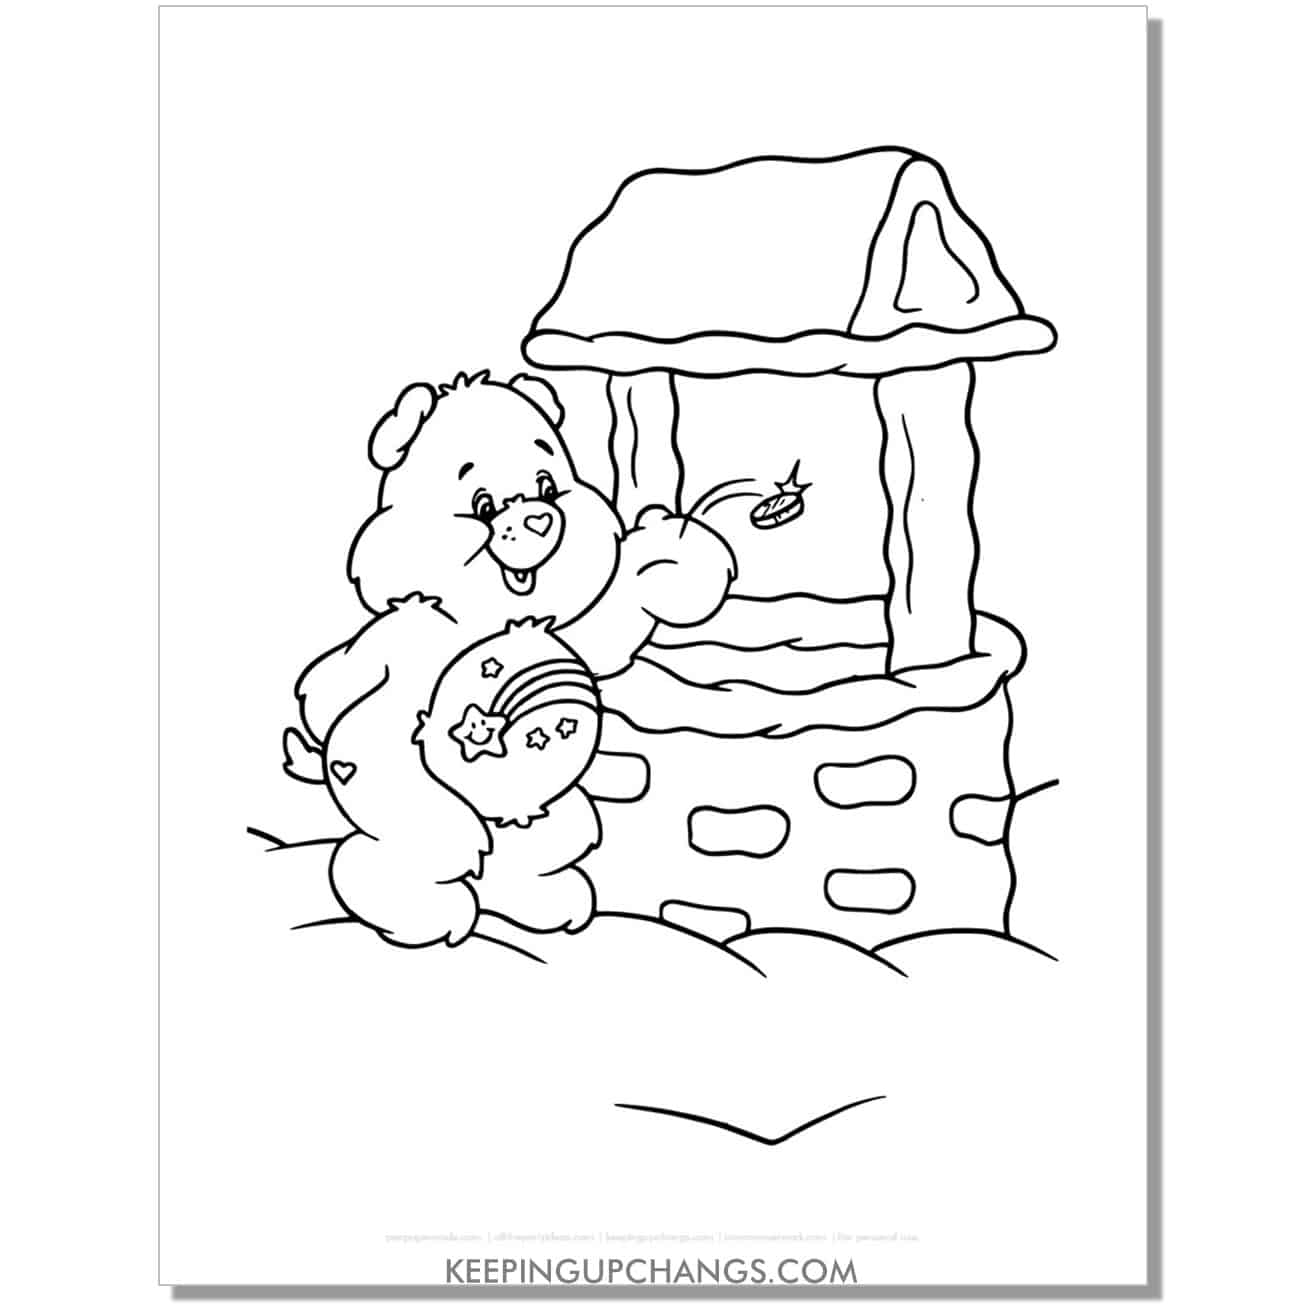 wish bear throwing coin into well care bear coloring page, sheet.